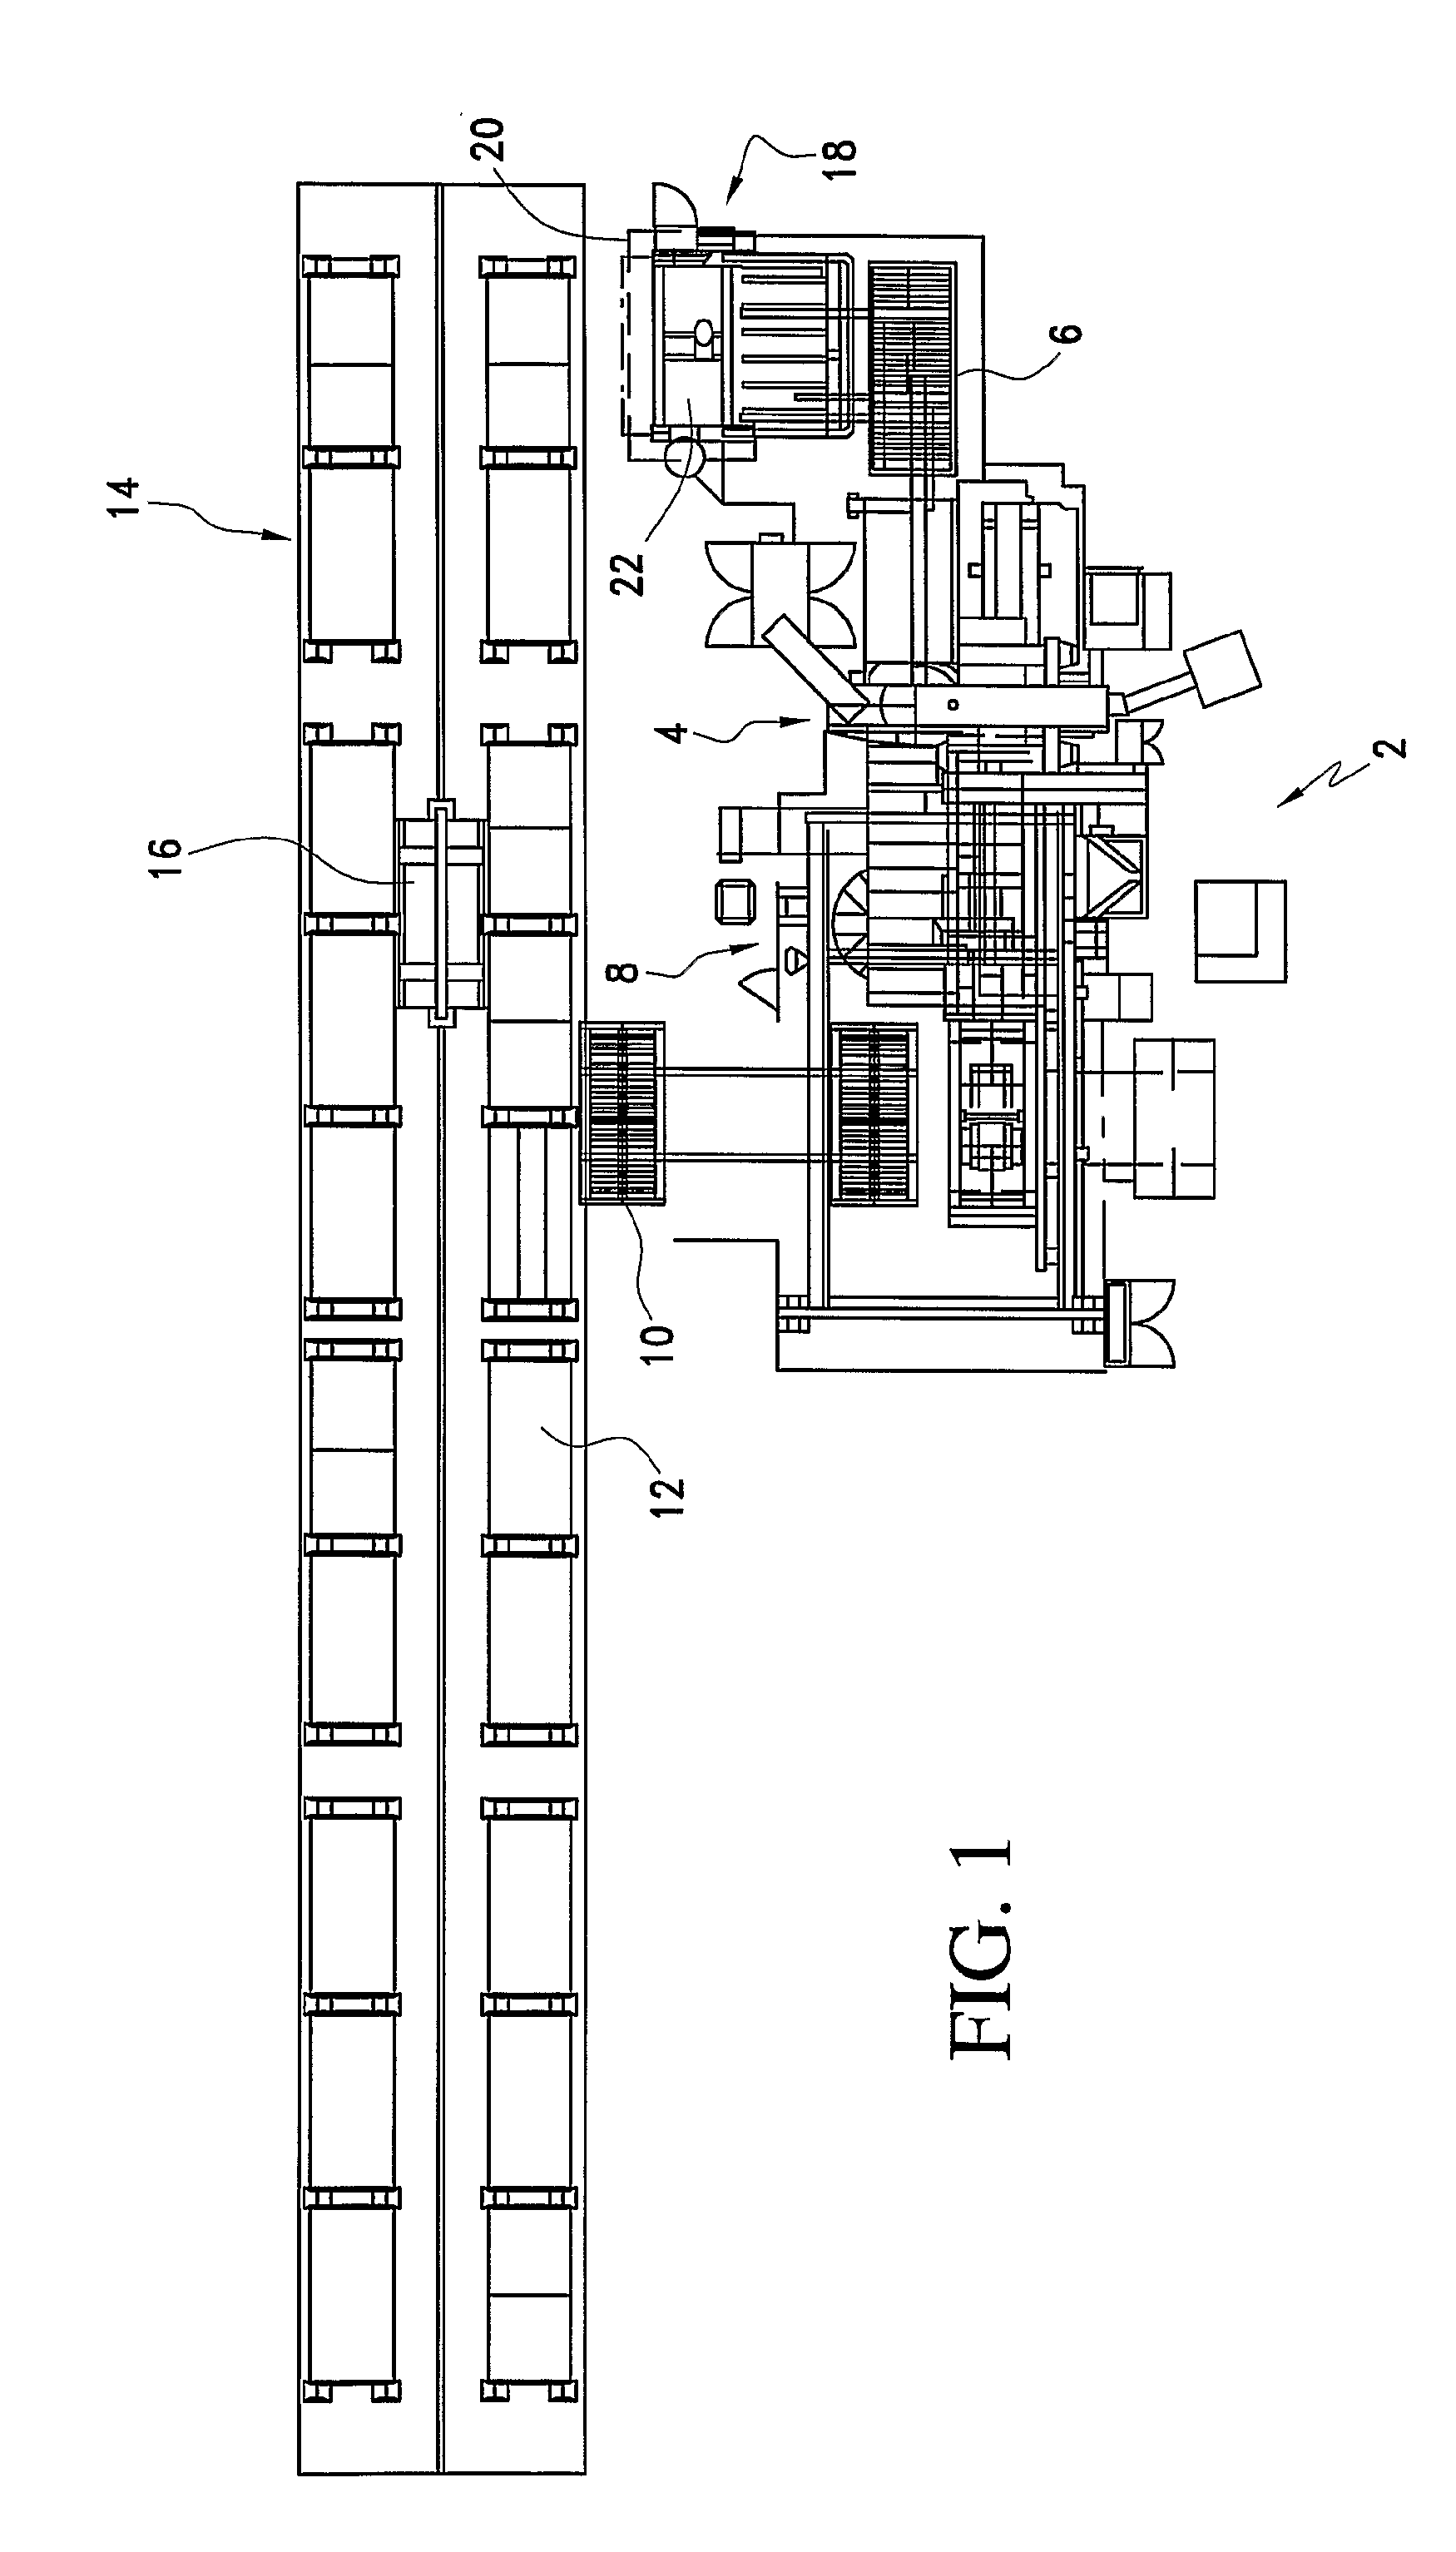 Apparatus and method for handling short run quick changeover fabrication jobs